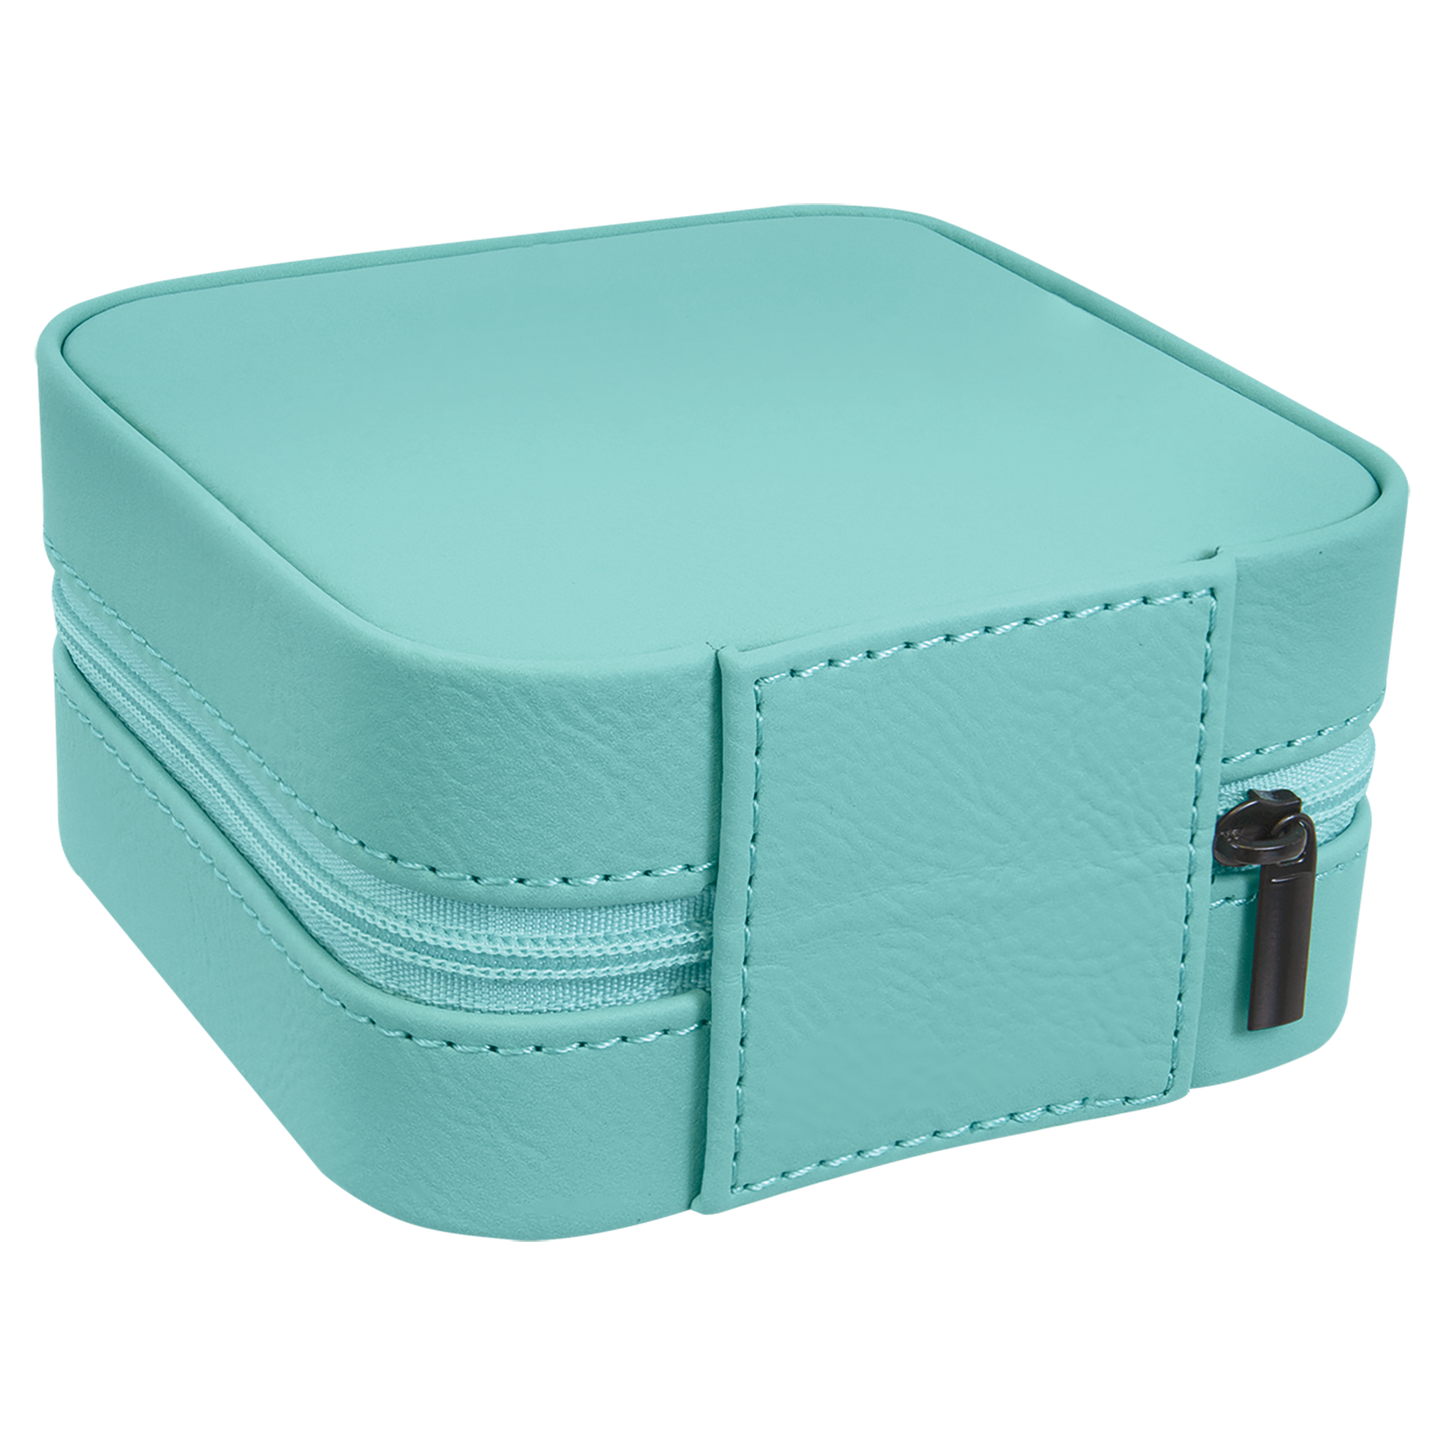 Be A Sunflower Travel Jewelry Box - Teal